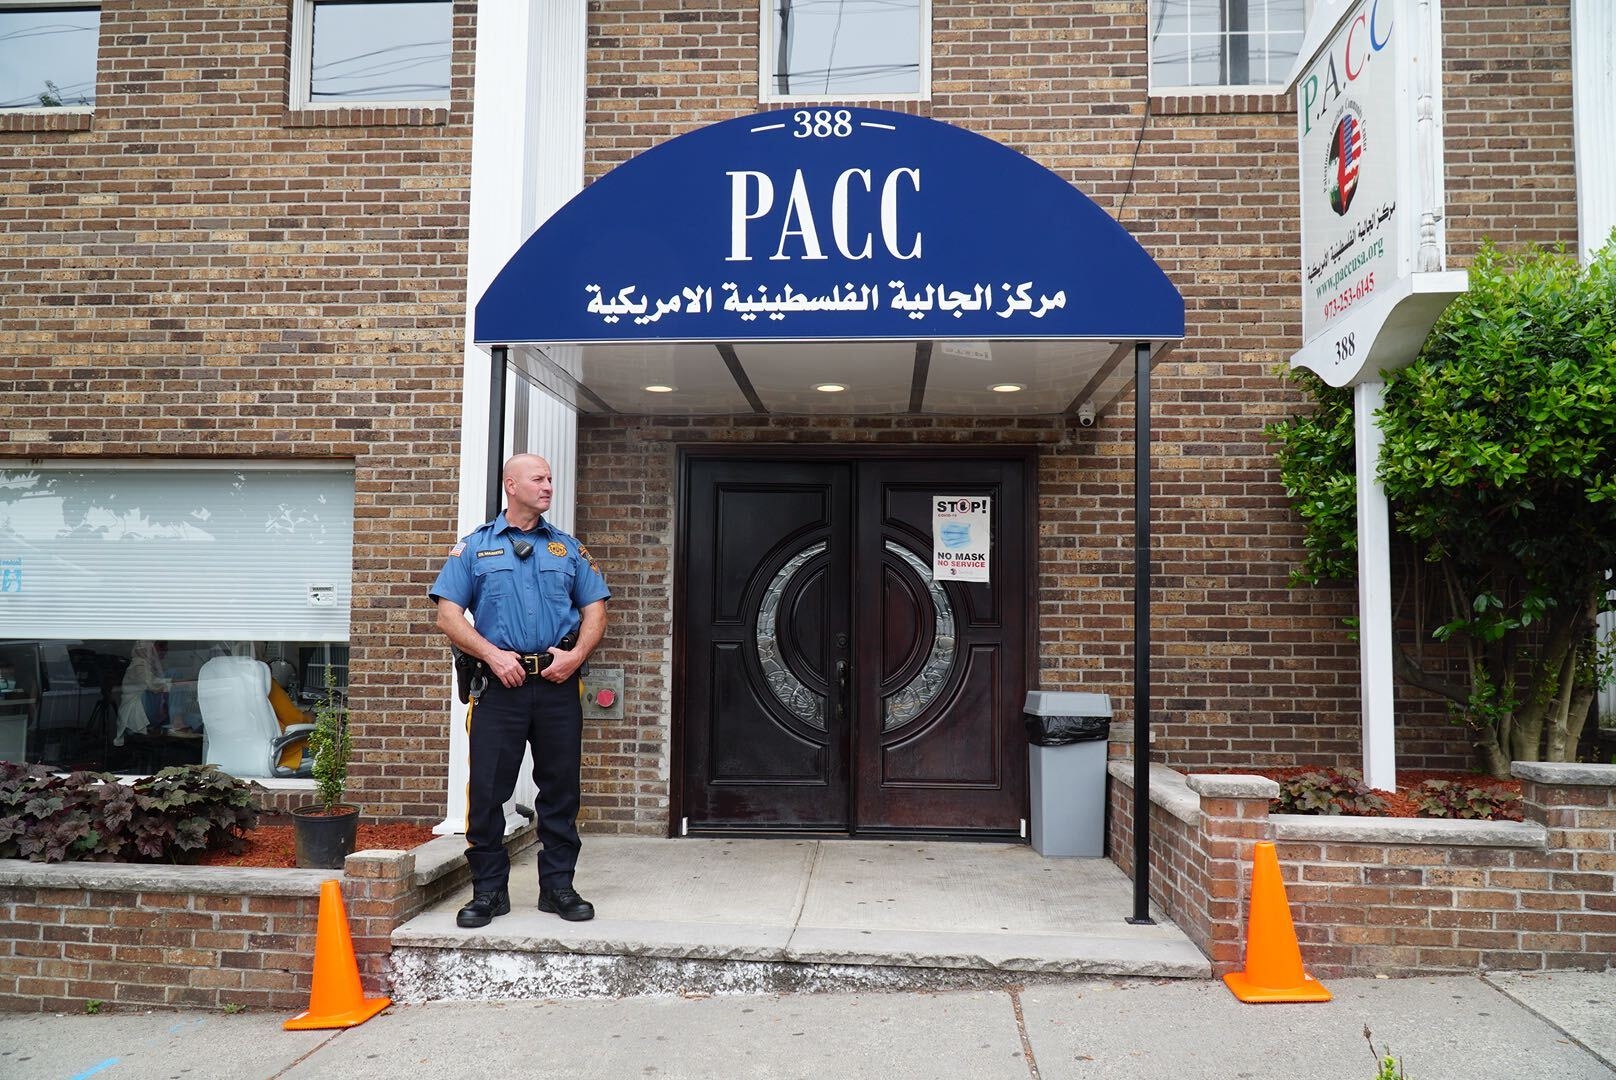 PACC has hired private security and the police department said it would be conducting patrols every hour at the centre for the next two days.